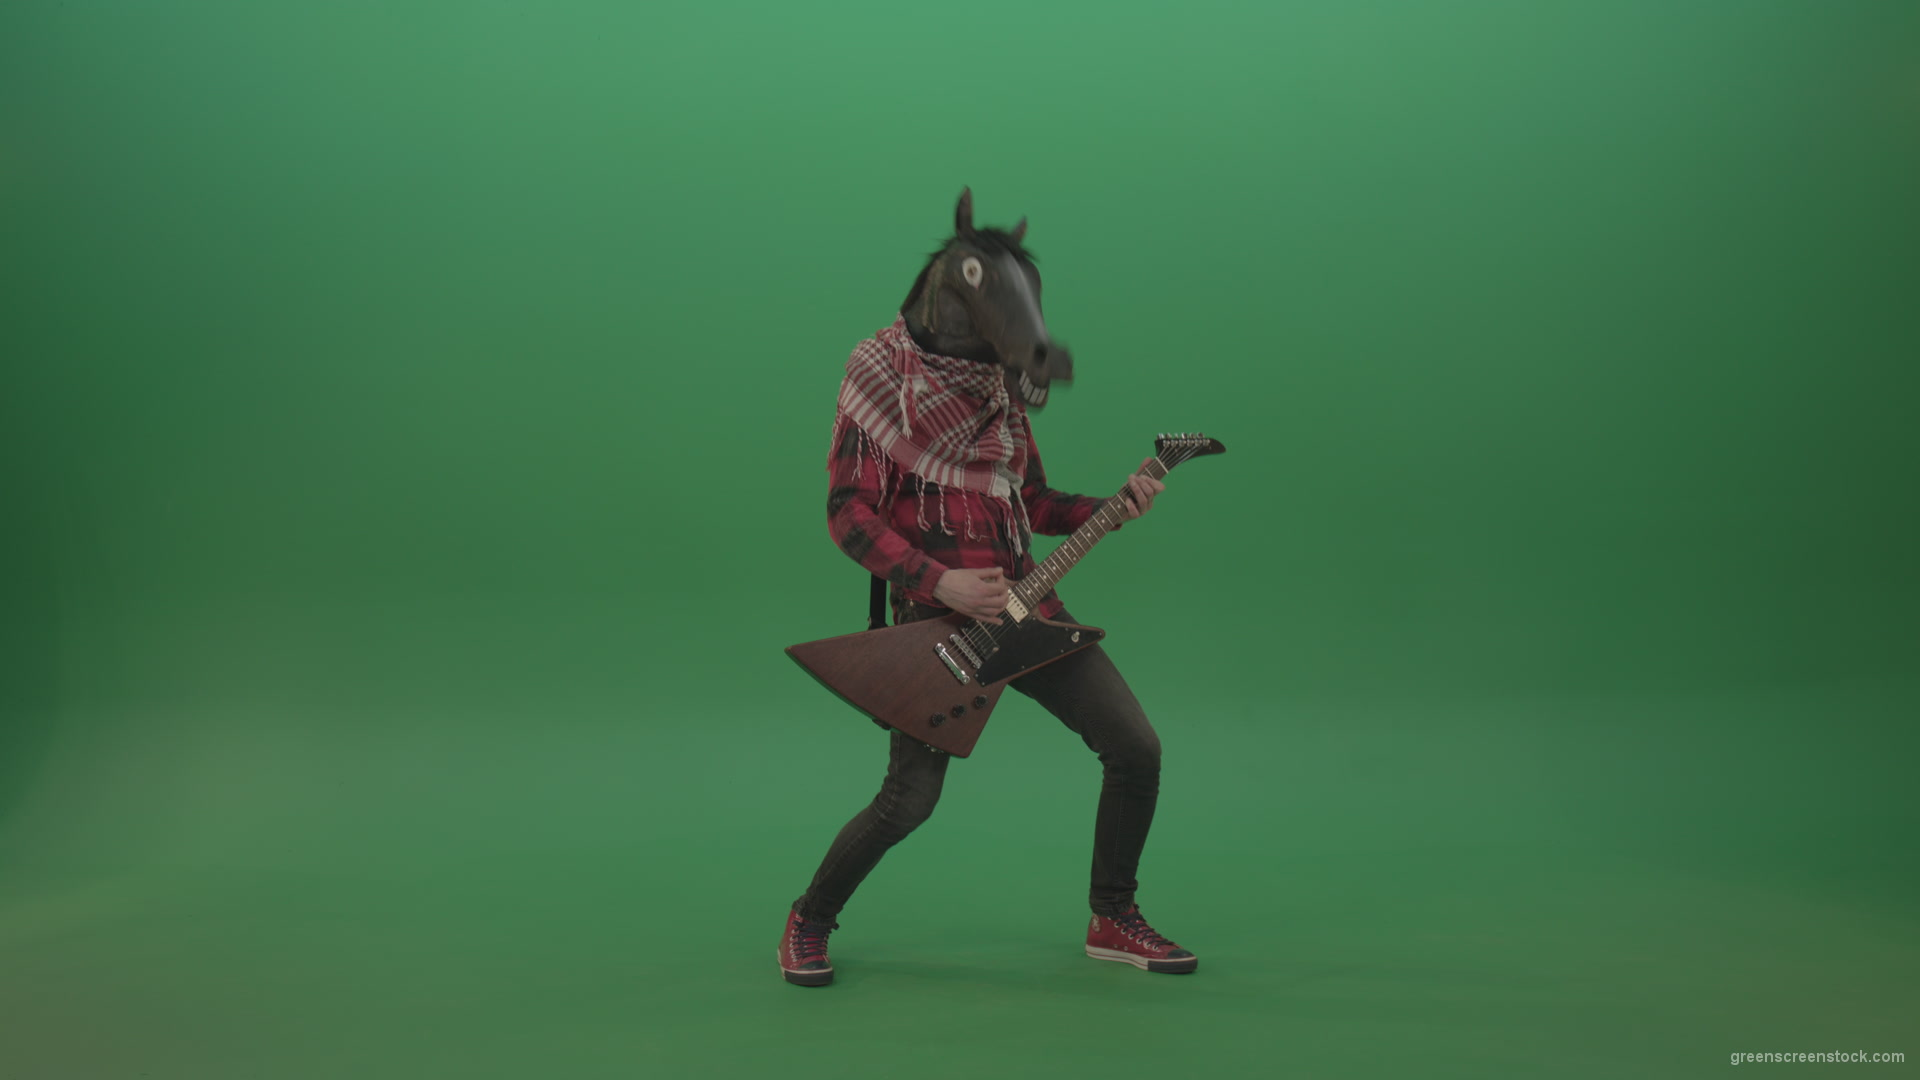 Green-screen-horse-man-guitaris-play-hard-rock-music-with-guitar-isolated-on-green-background_006 Green Screen Stock